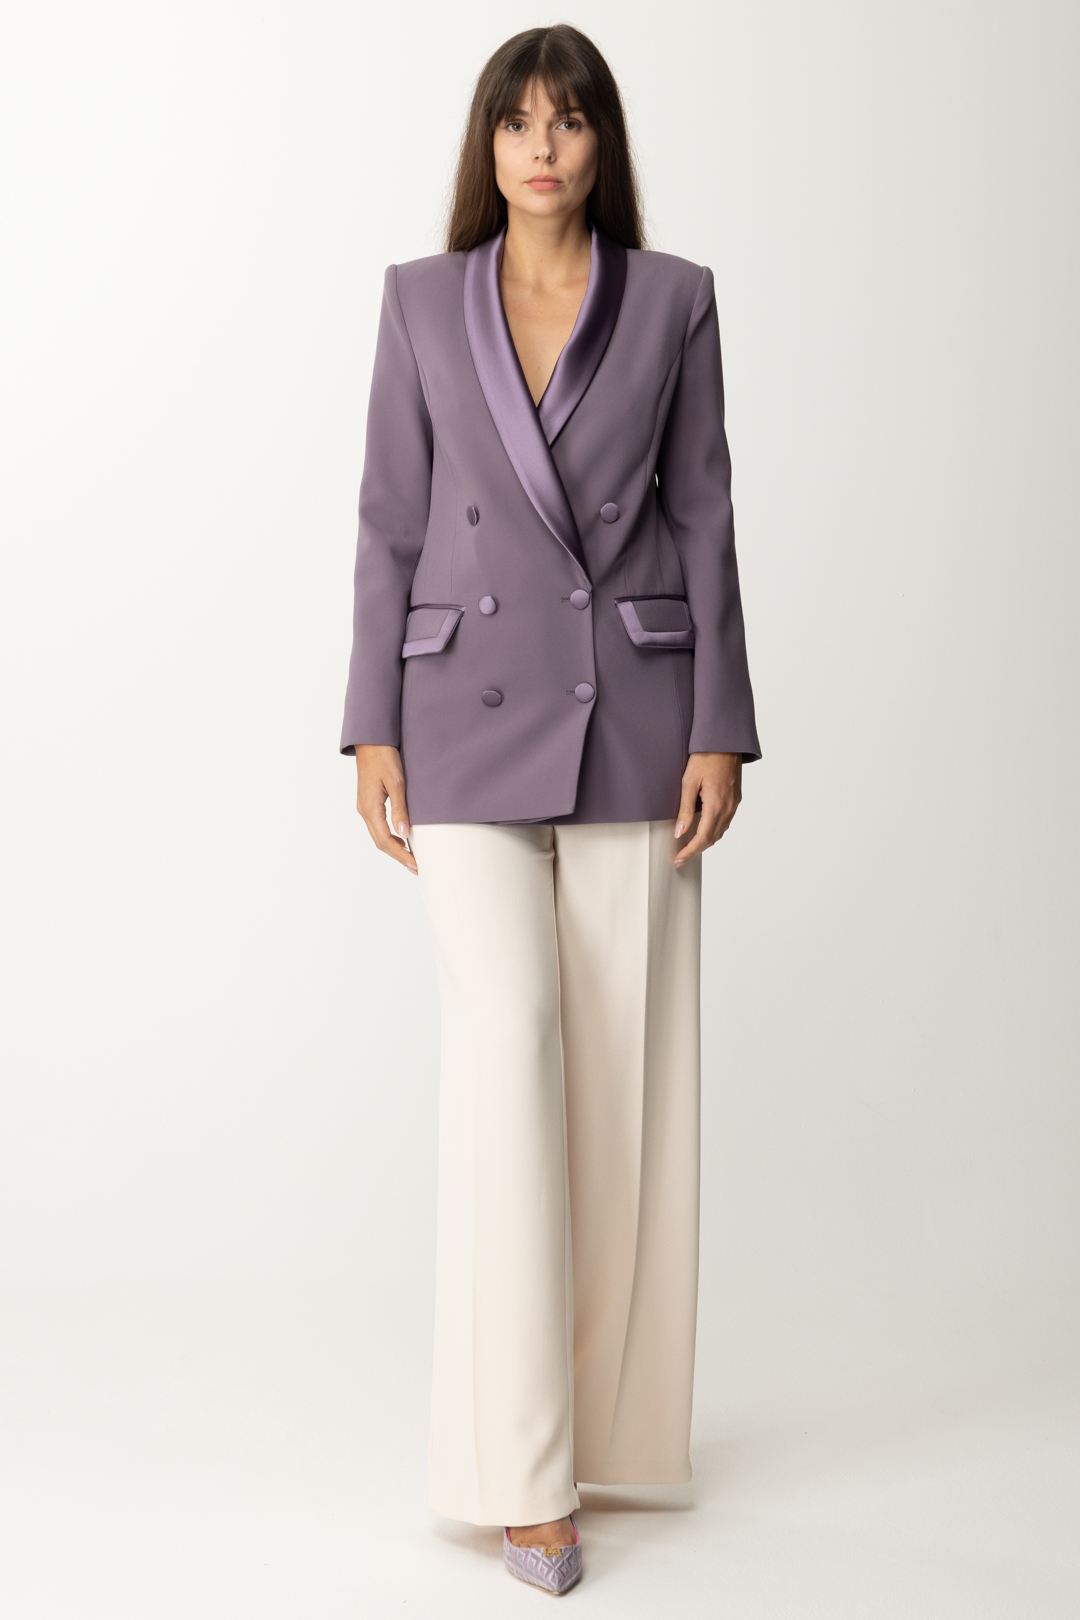 Preview: Elisabetta Franchi Double-Breasted Jacket with Satin Details CANDY VIOLET